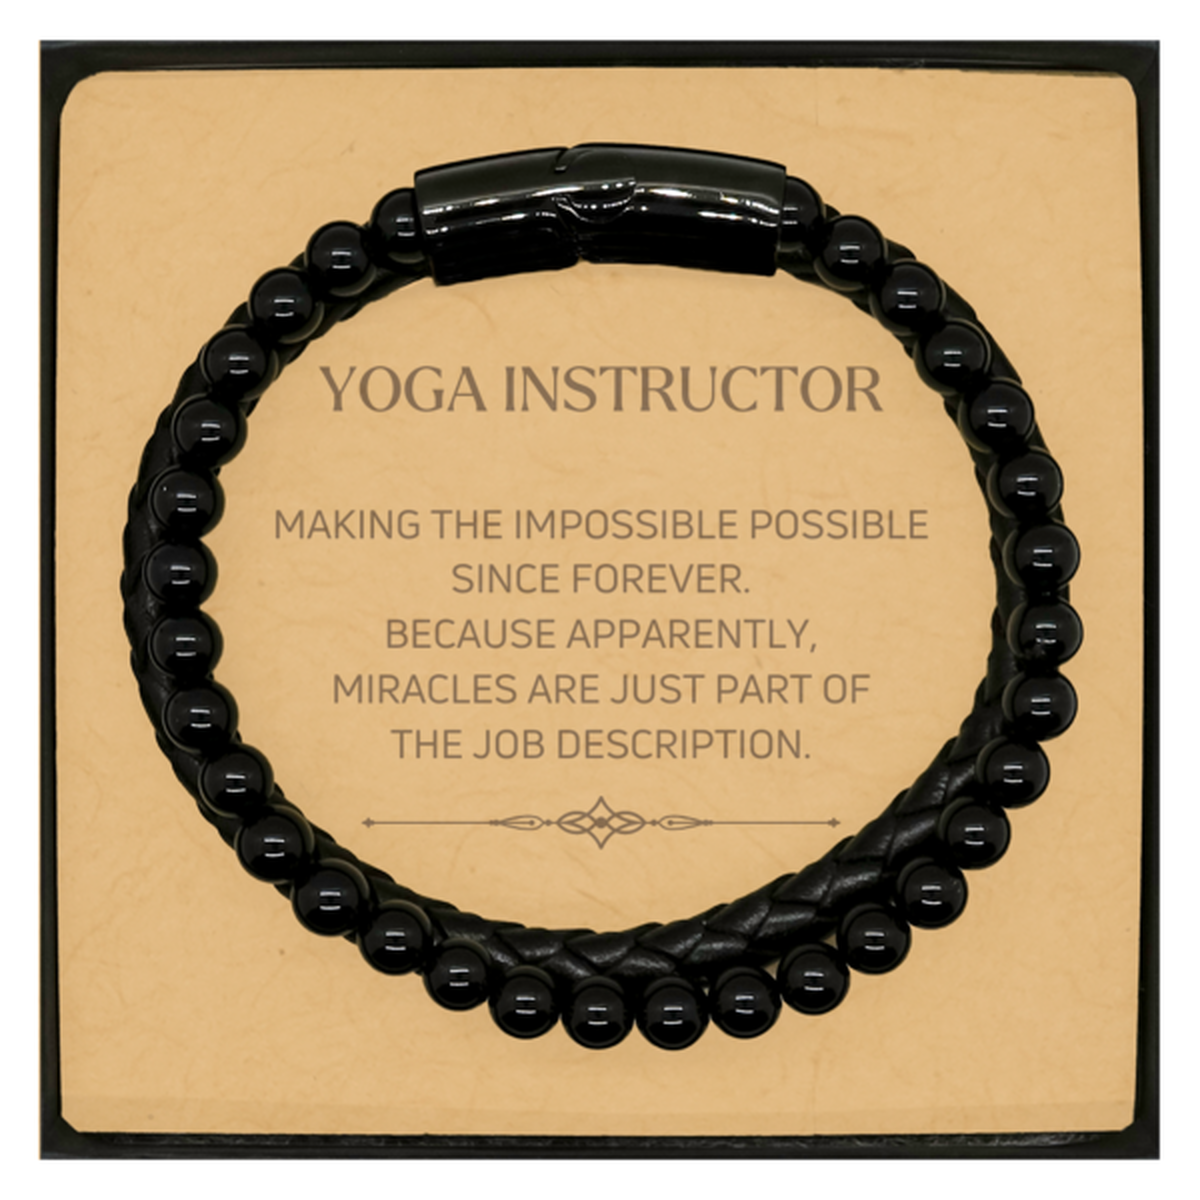 Funny Yoga Instructor Gifts, Miracles are just part of the job description, Inspirational Birthday Christmas Stone Leather Bracelets For Yoga Instructor, Men, Women, Coworkers, Friends, Boss